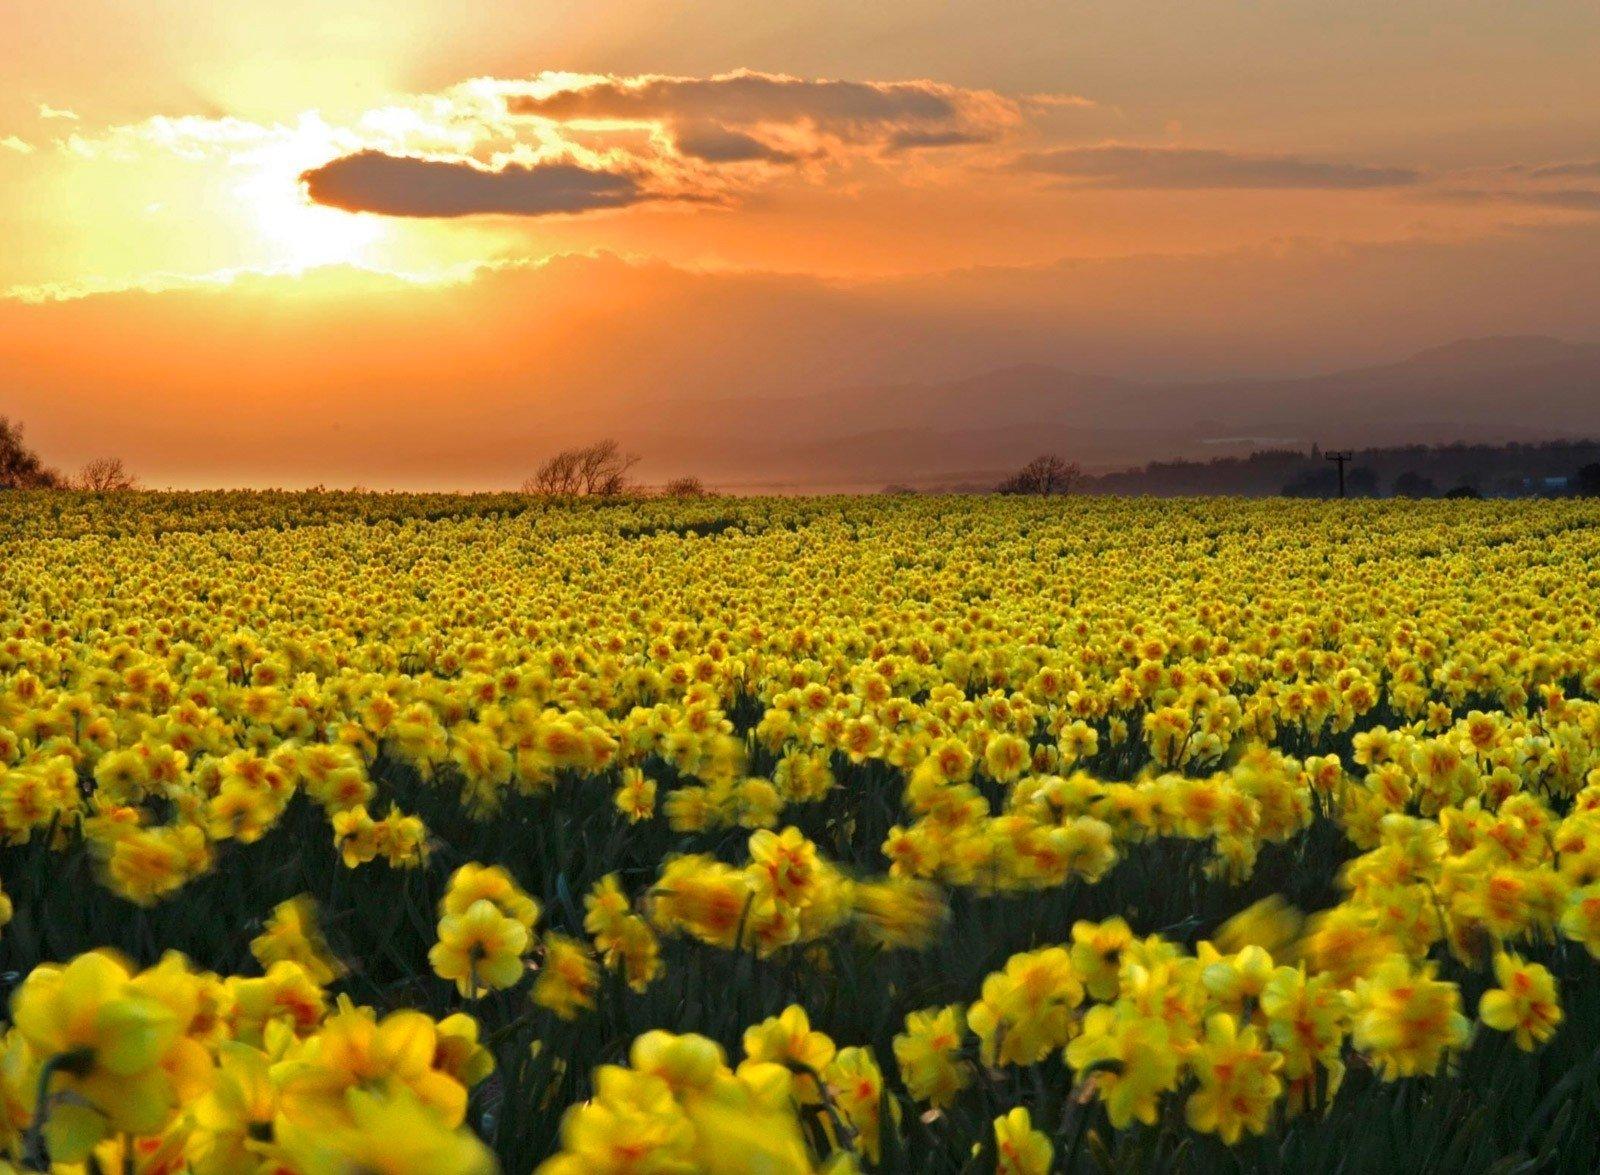 Daffodil HD Wallpaper and Background Image